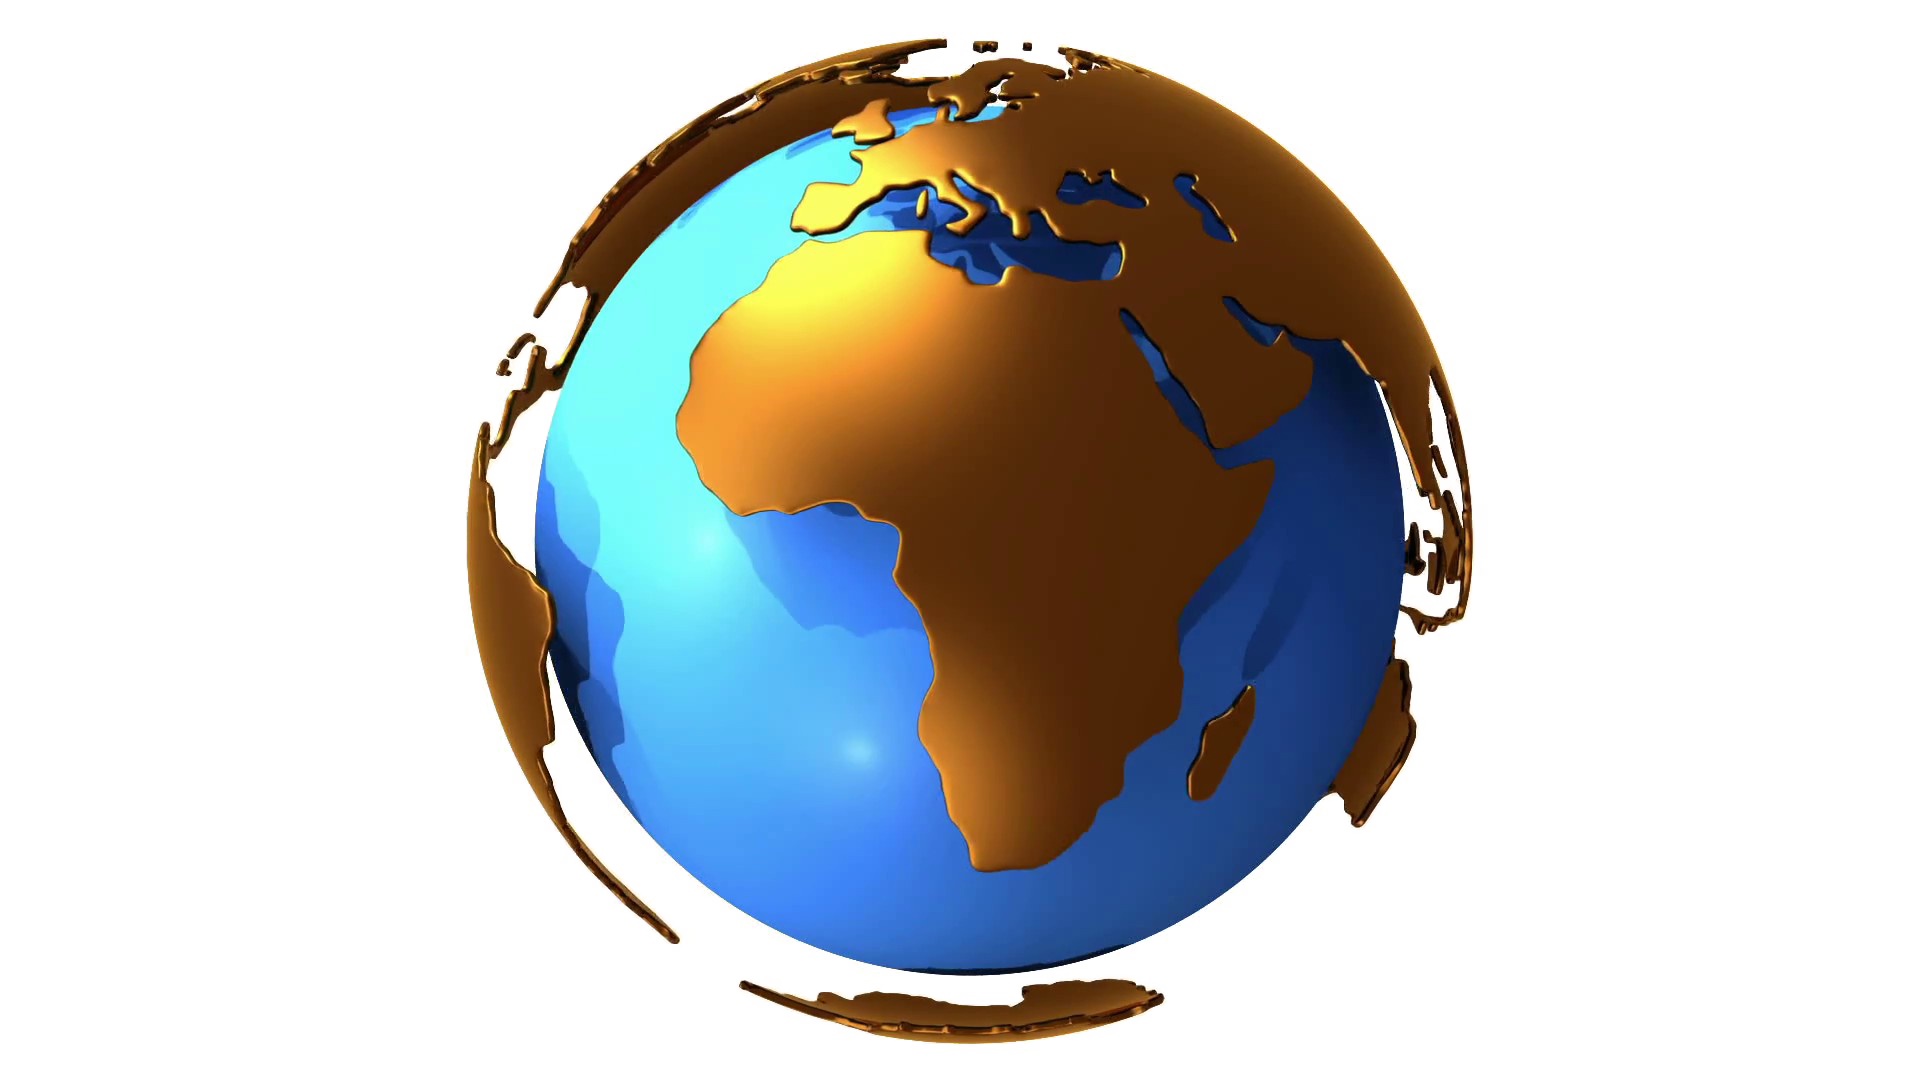 Earth Globe Images Free Transparent Image HQ PNG Image